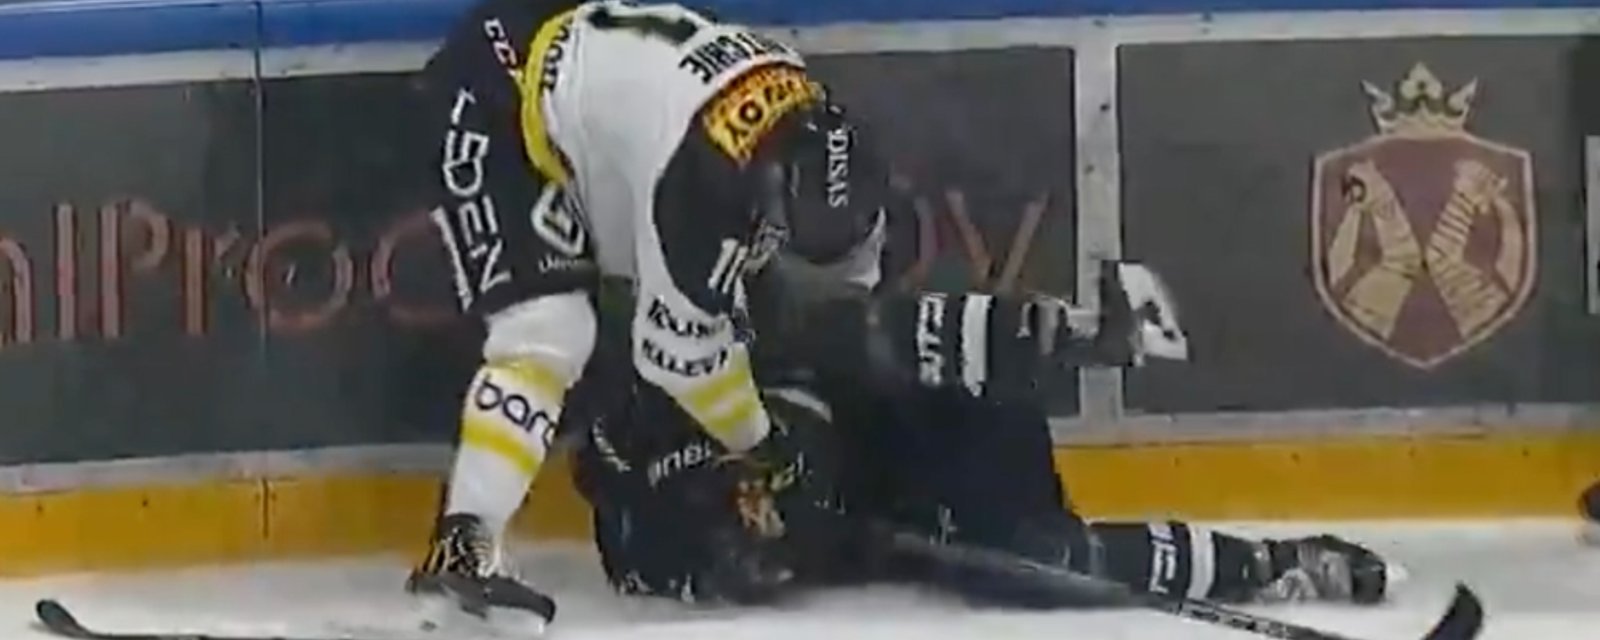 Former 1st rounder Nick Richie ejected for on-ice attack on defenseless opponent!